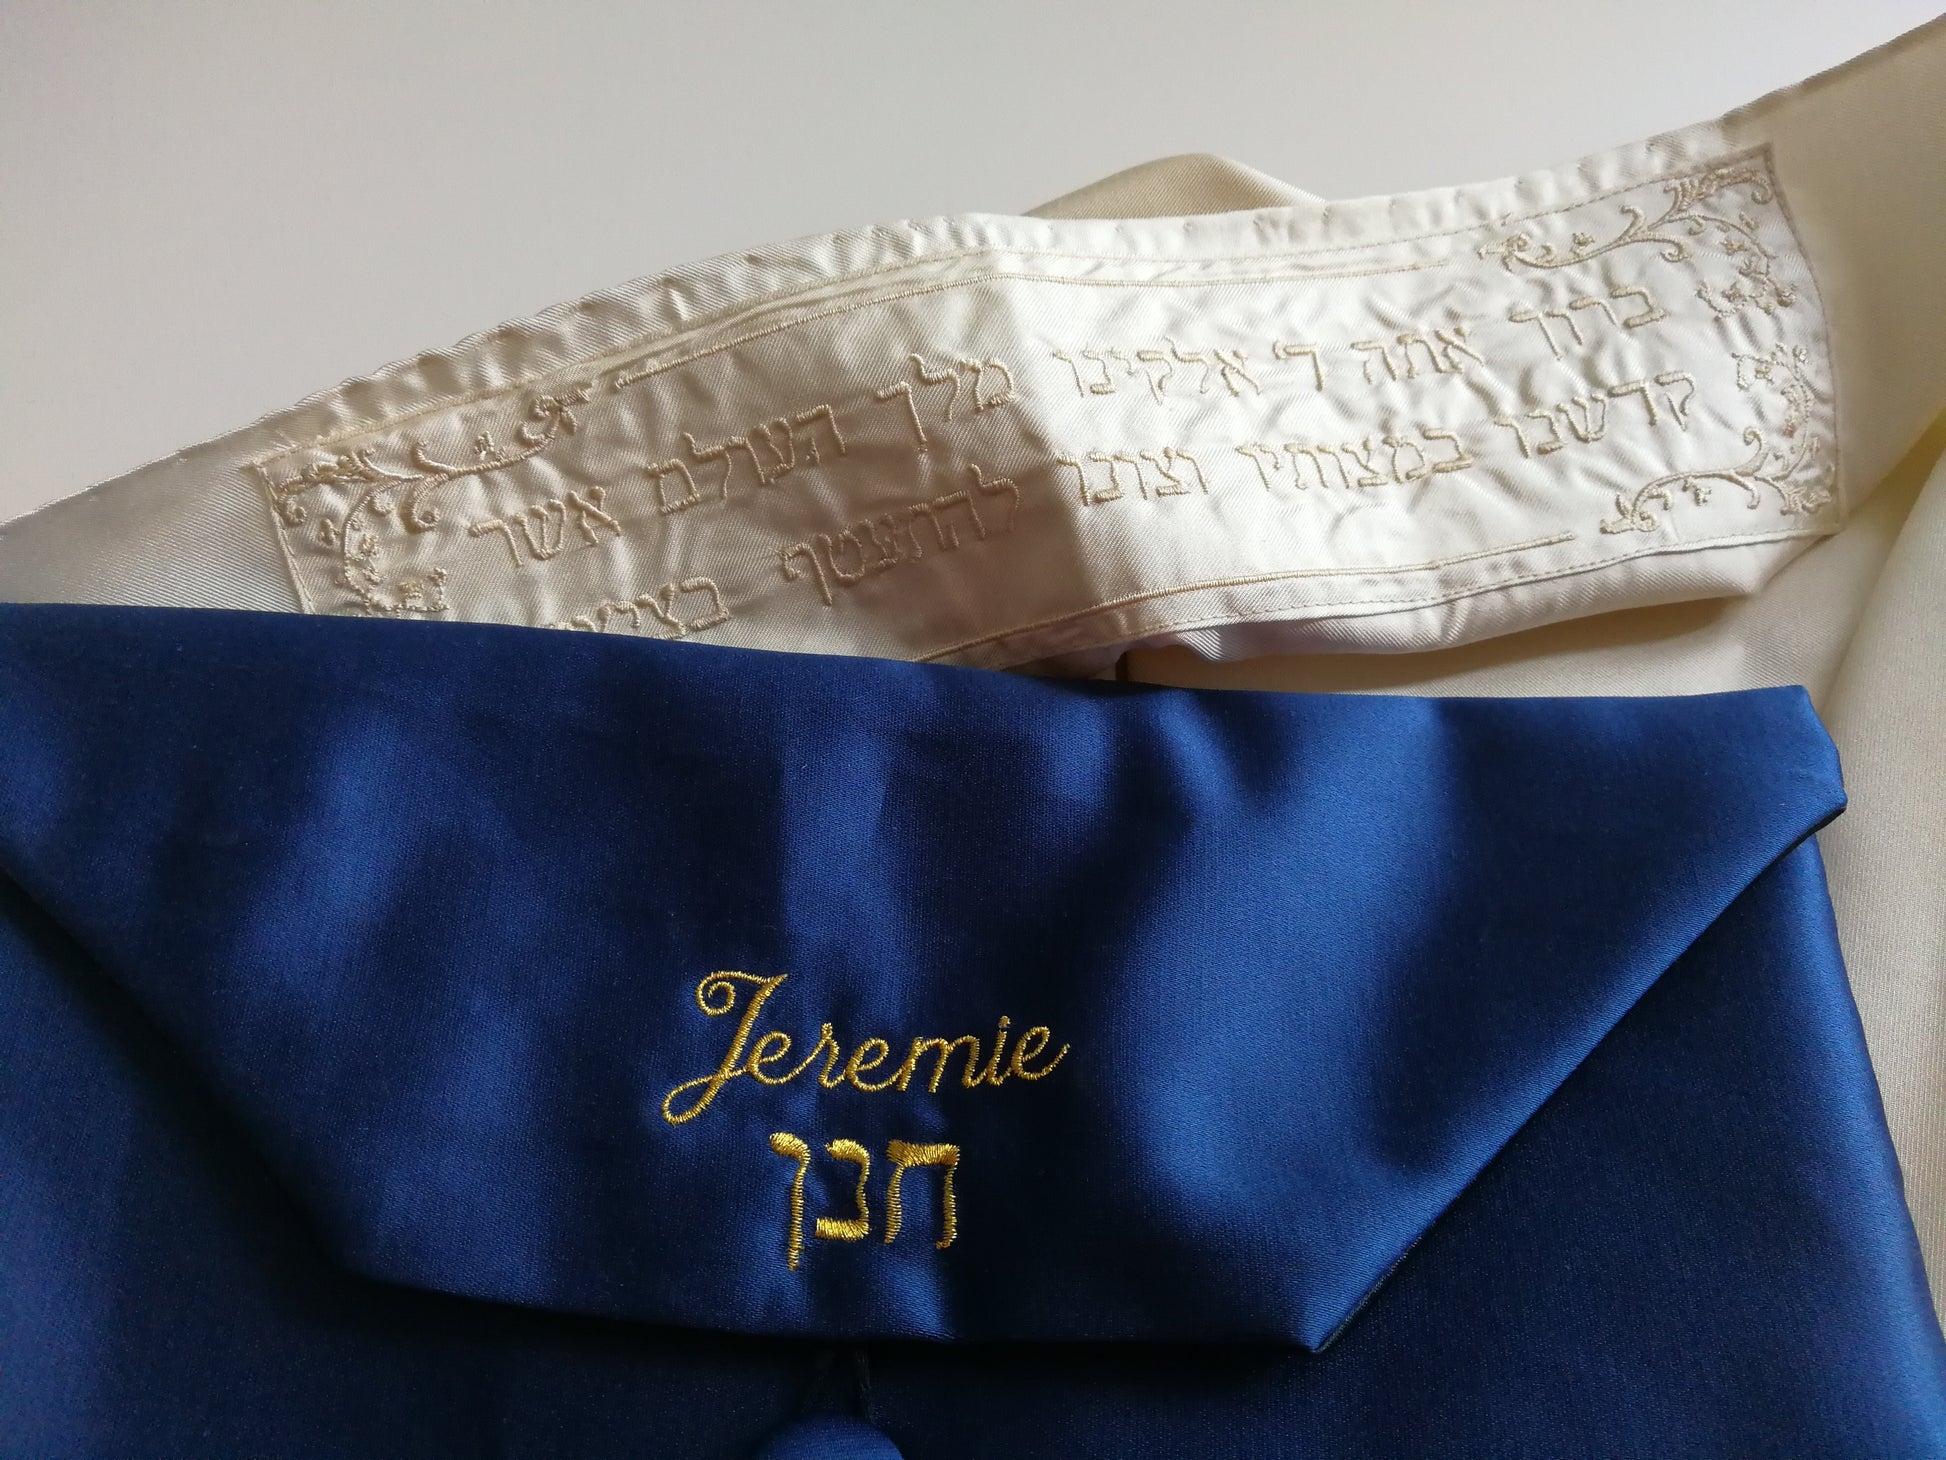 Classic Tallit with text